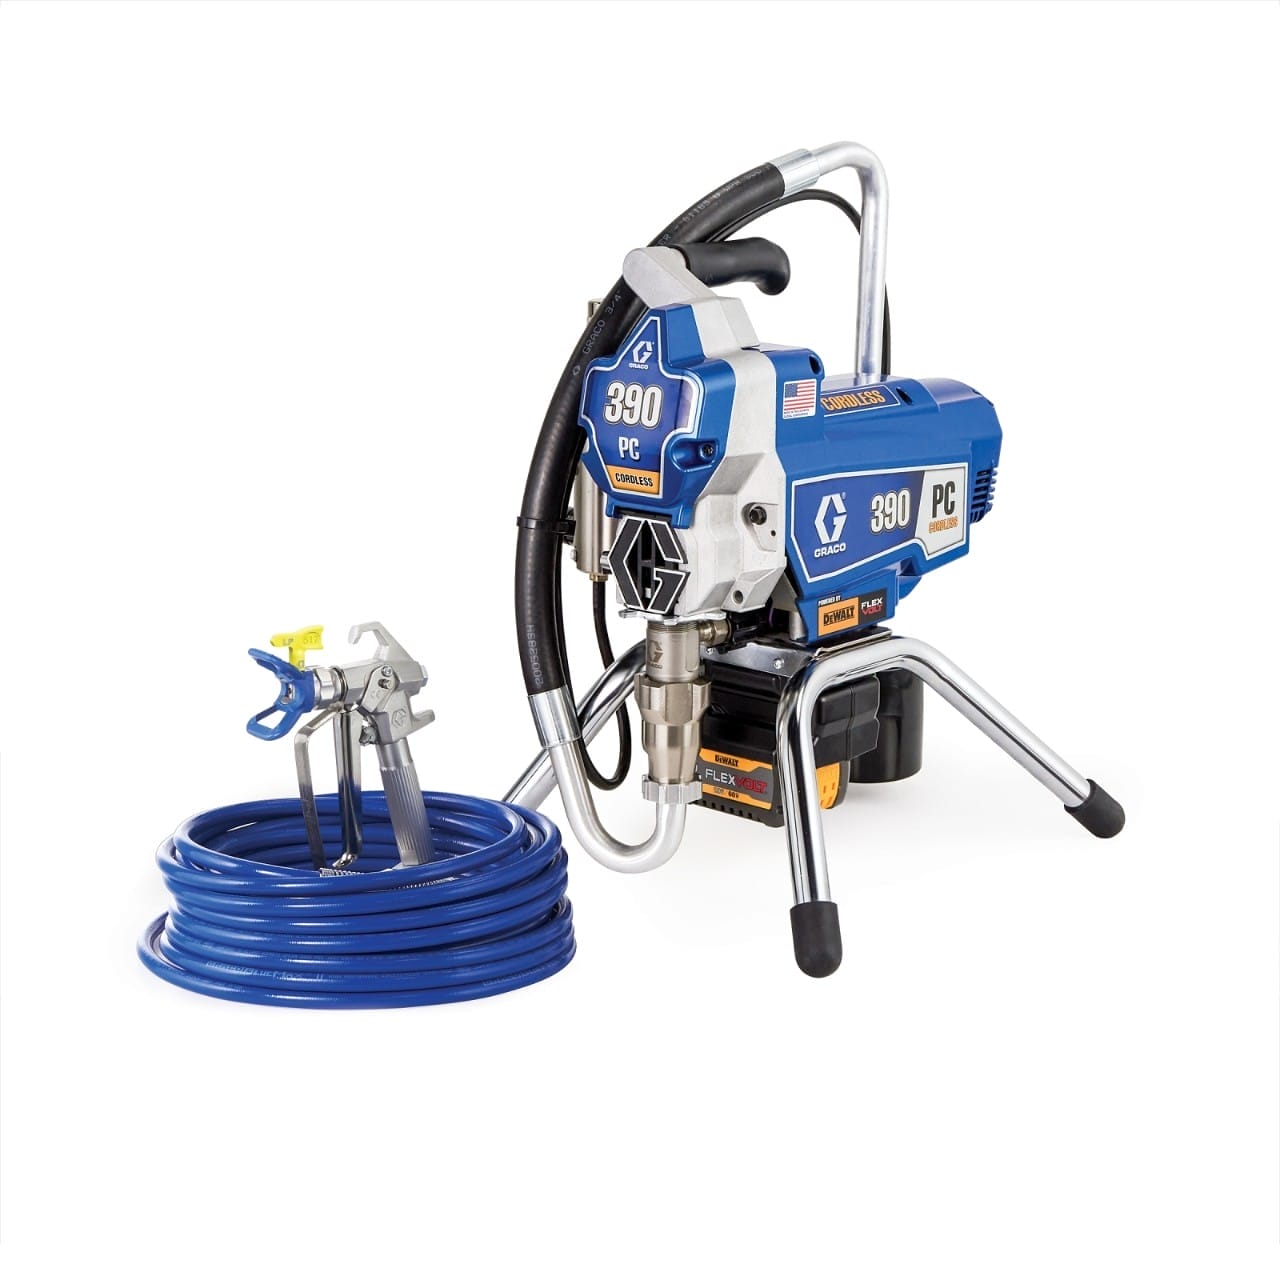 Graco 390 PC Cordless Airless Sprayer, Stand